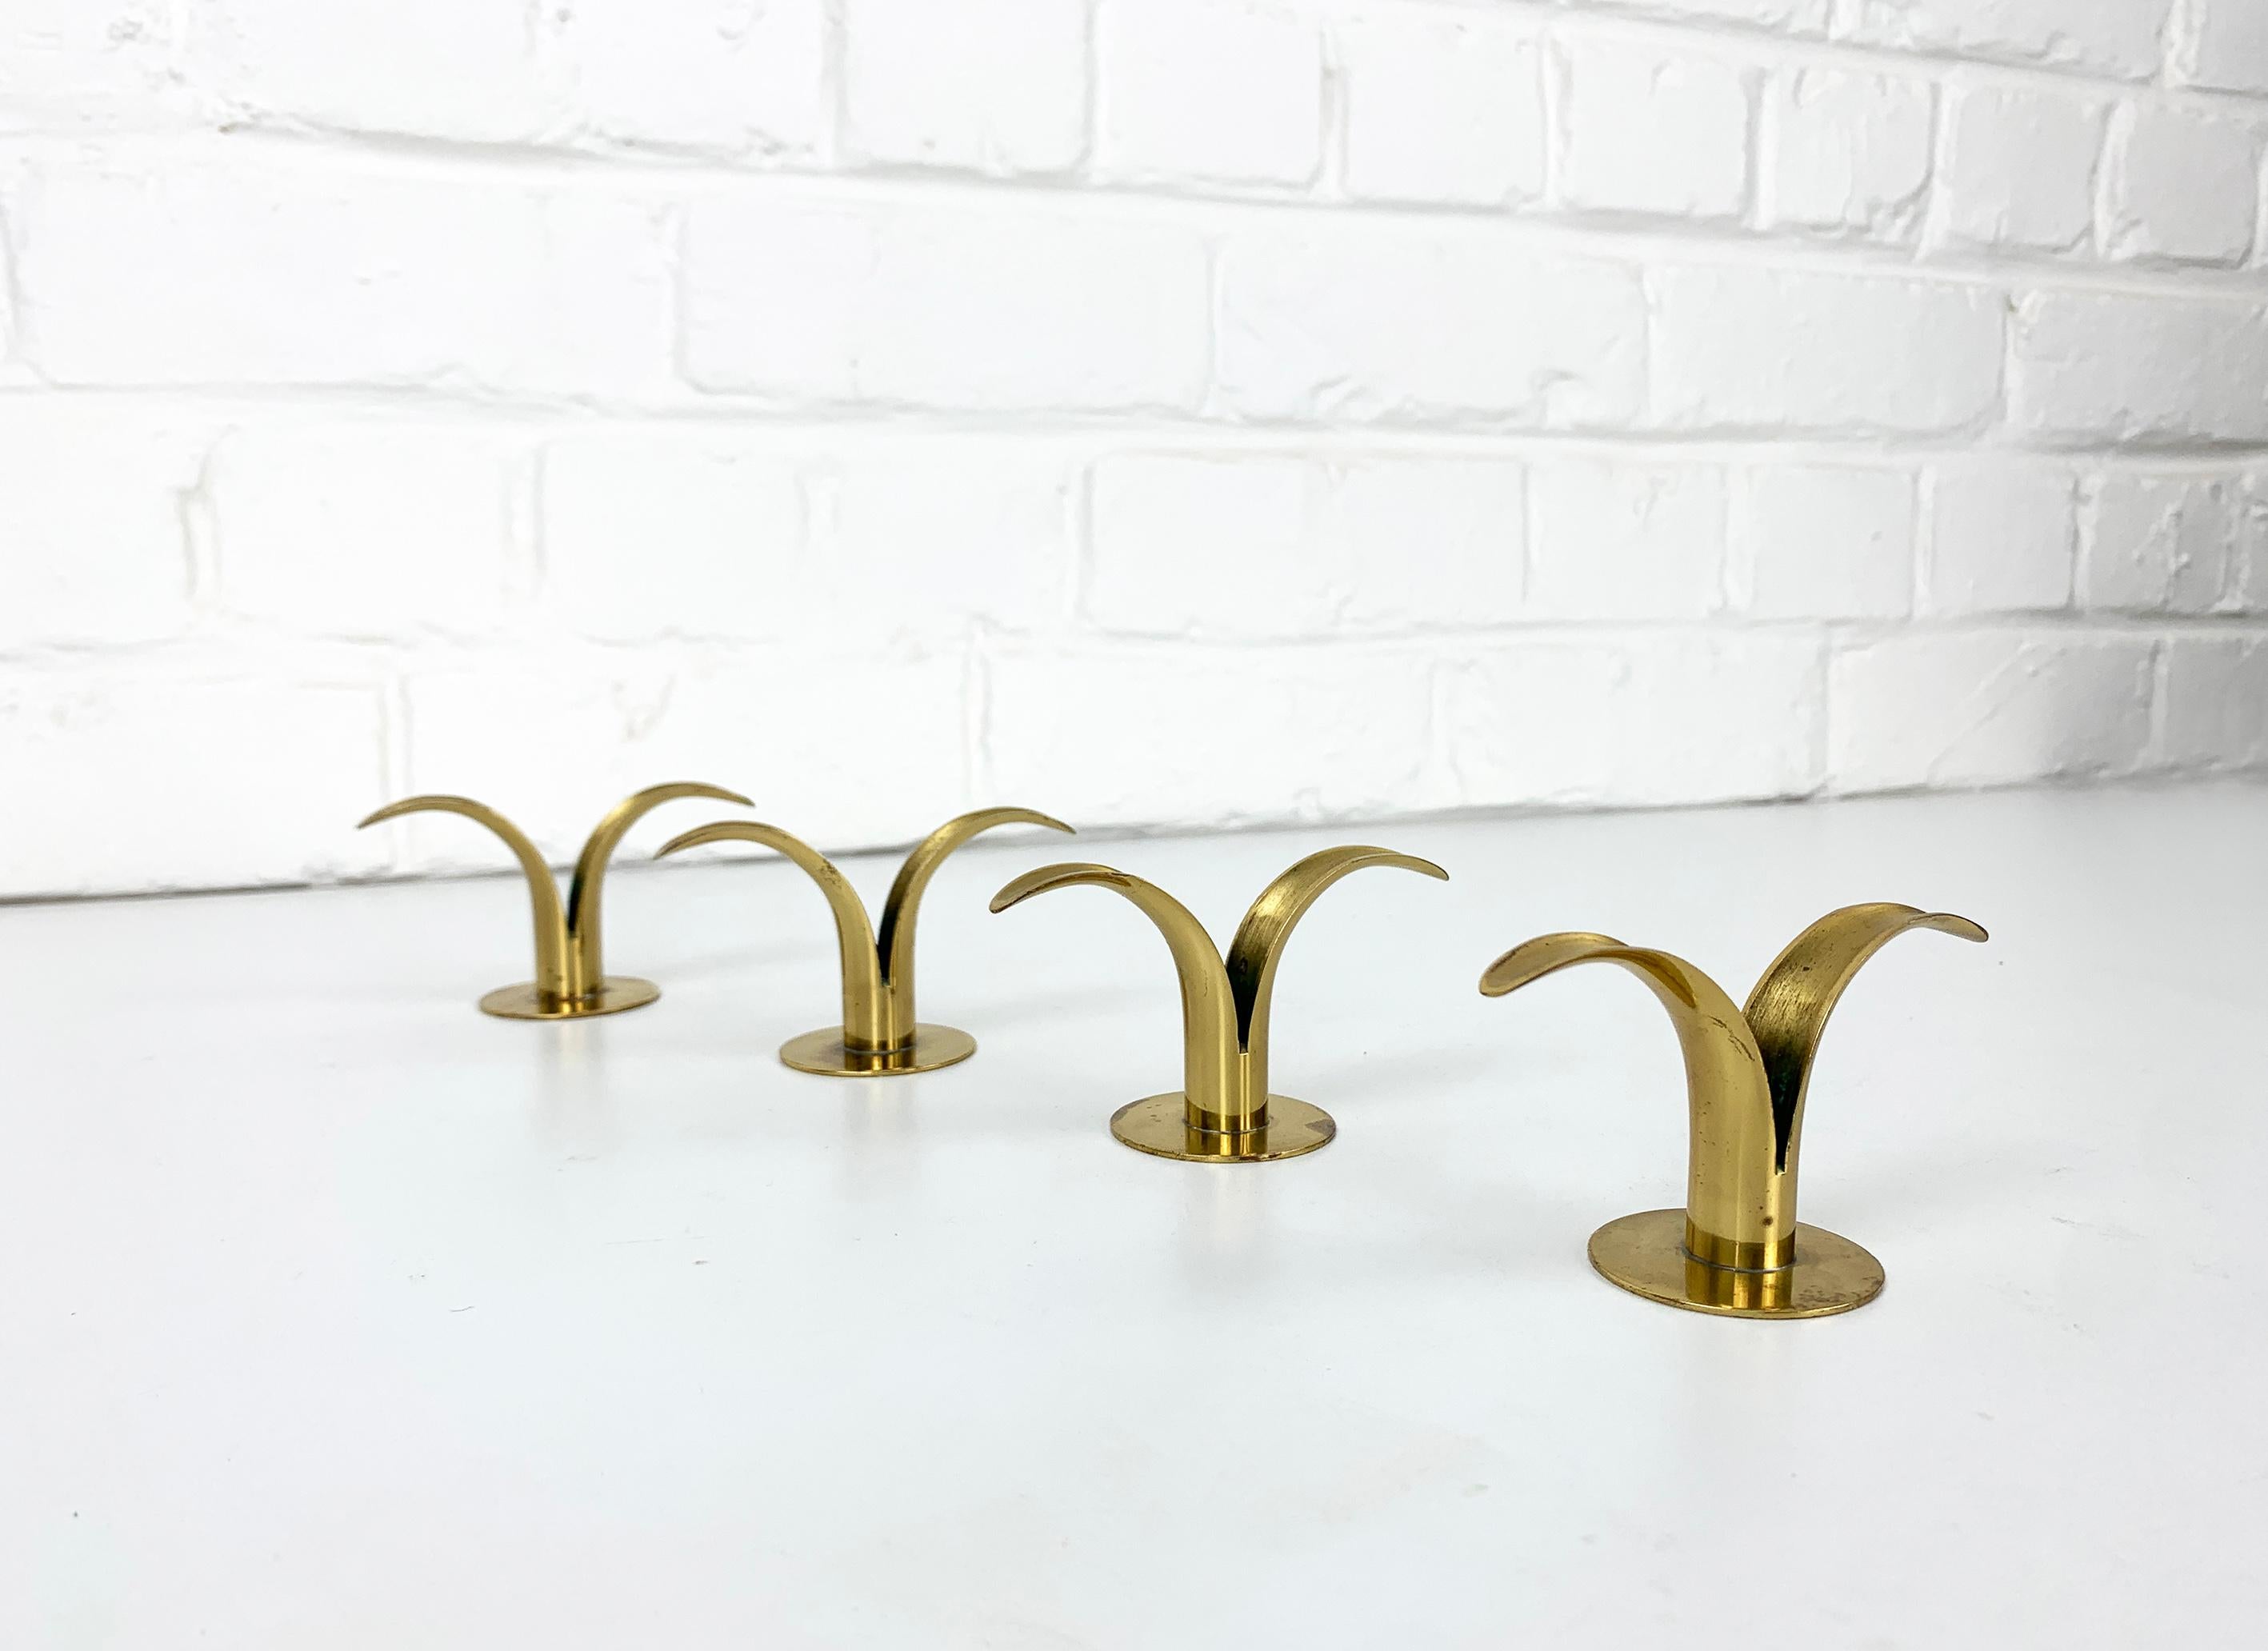 4 Small Mid-Century Brass Model Lily Candleholders from Lbe Konst, Ystad, Sweden For Sale 2